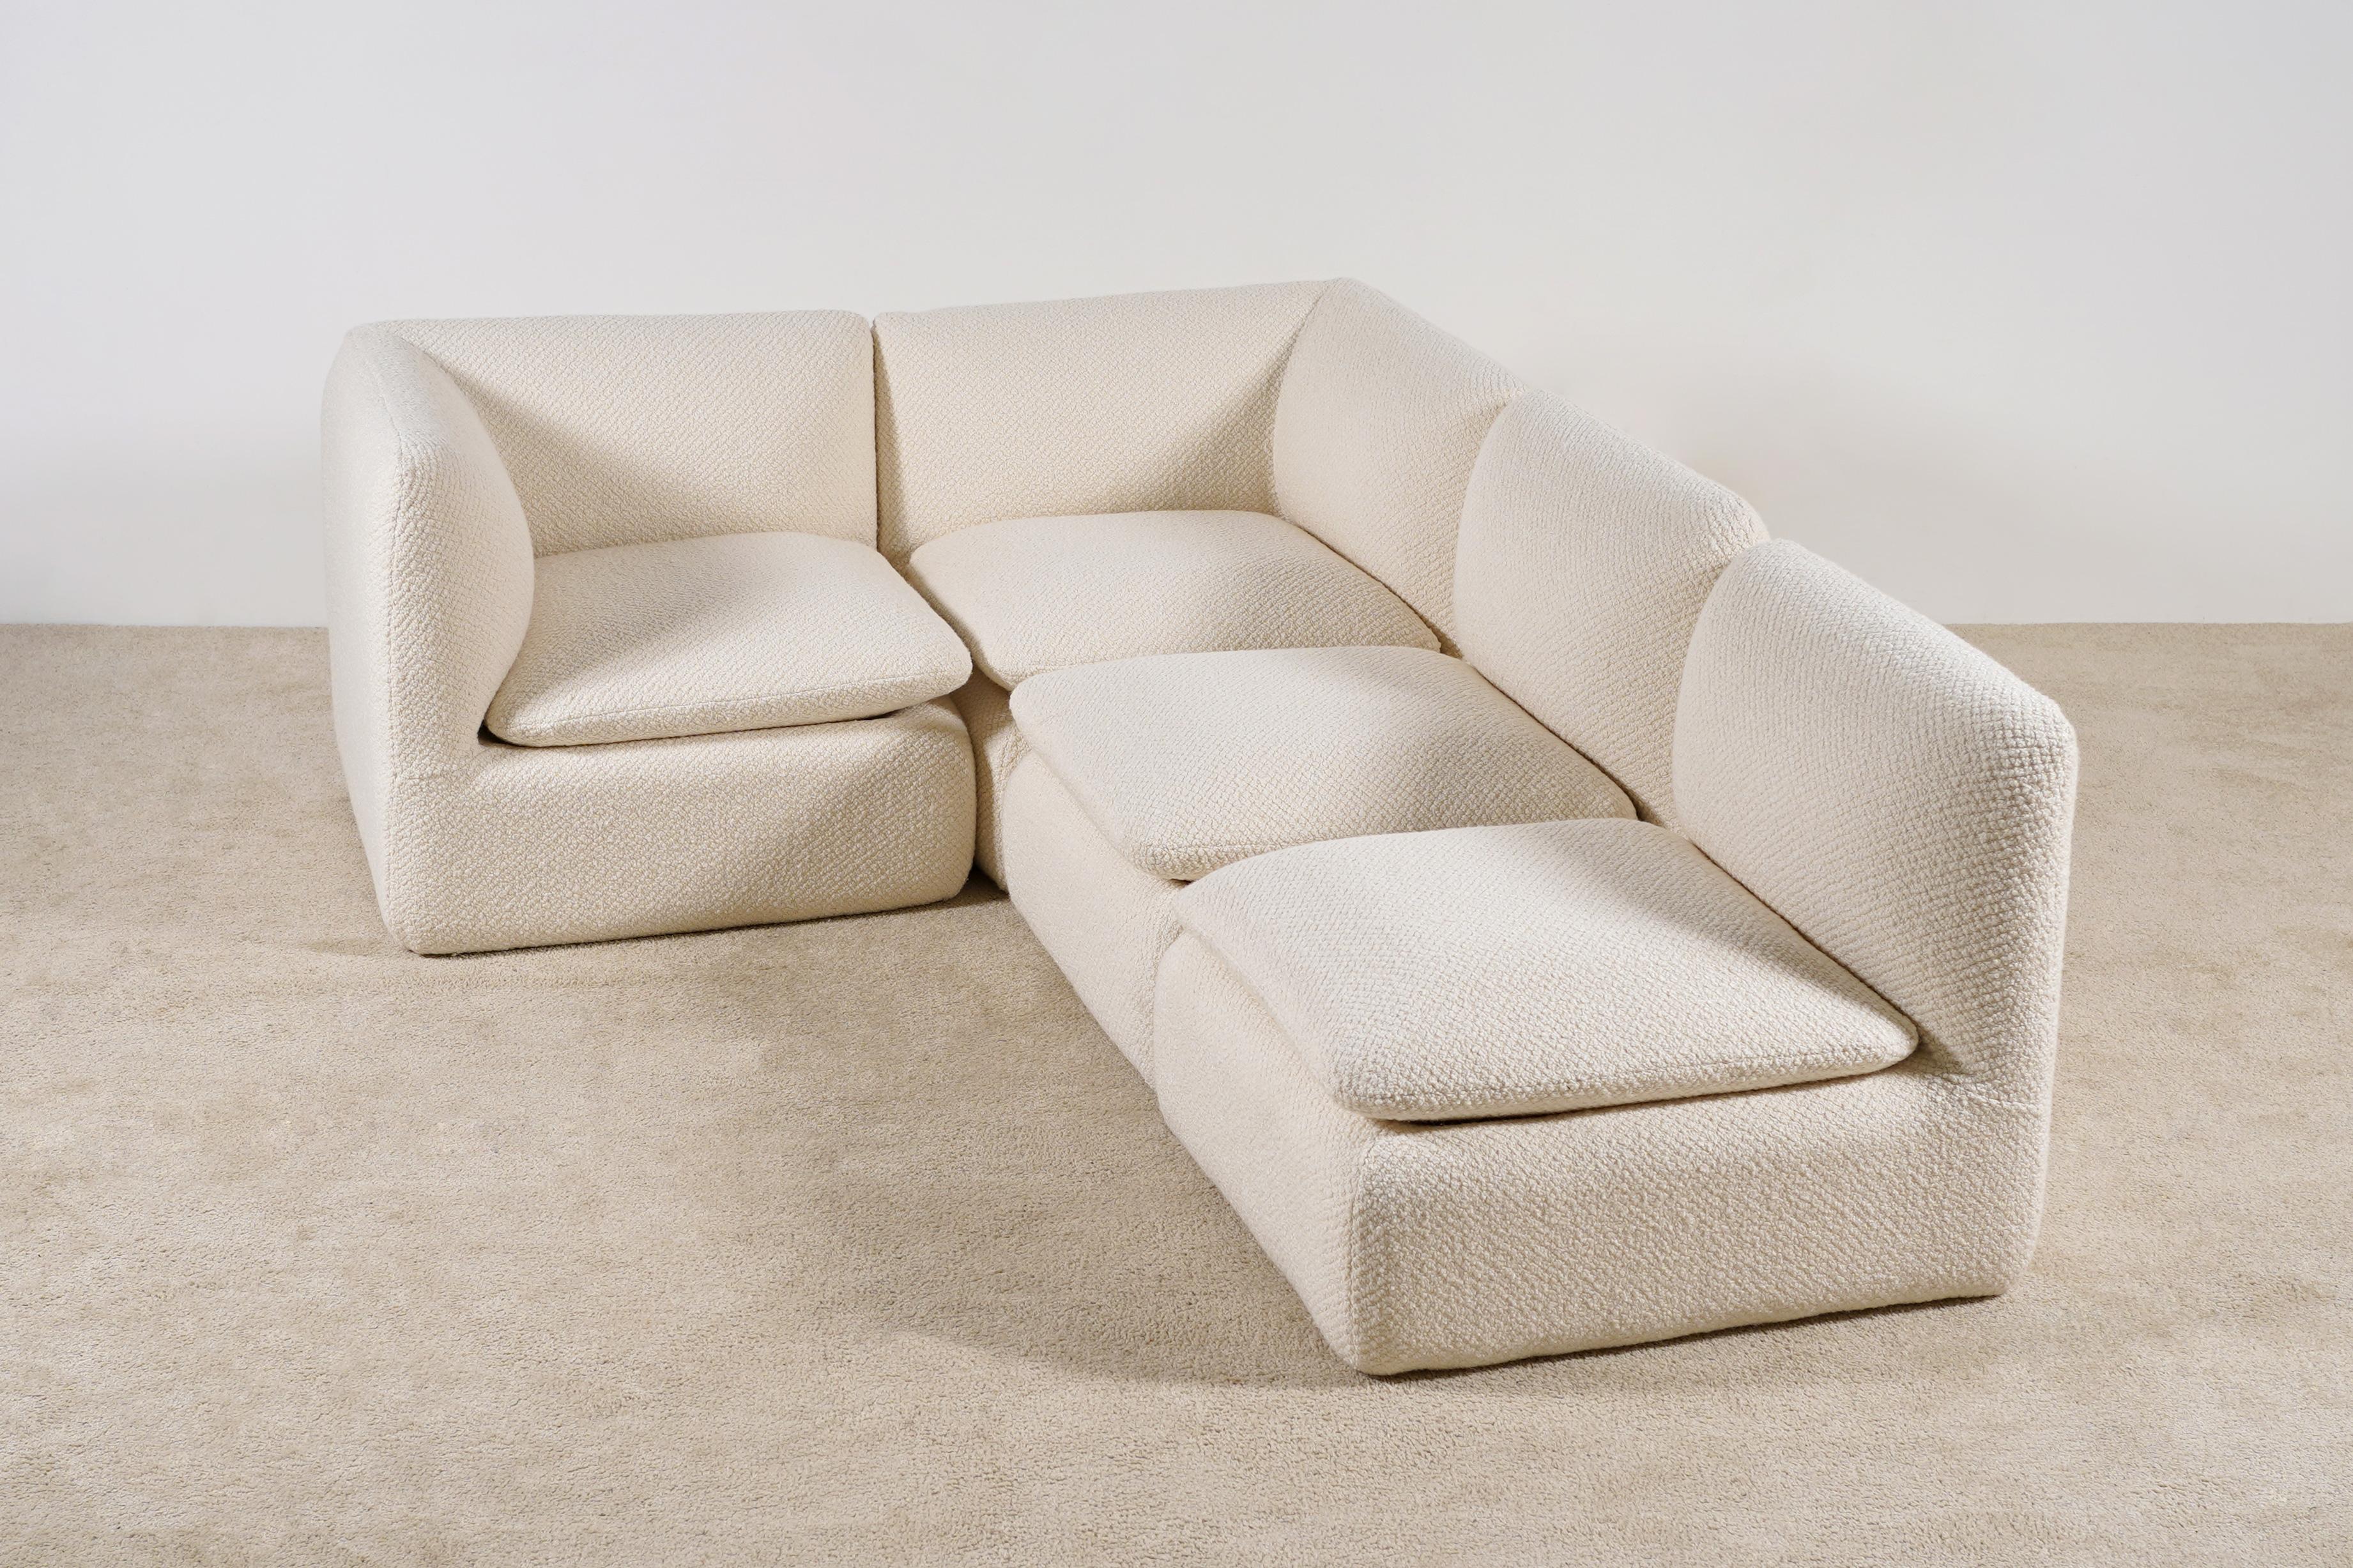 Mid-Century Modern Airborne, Sectional Sofa Composed of 4 Modular Lounge Chairs, France, 1970s